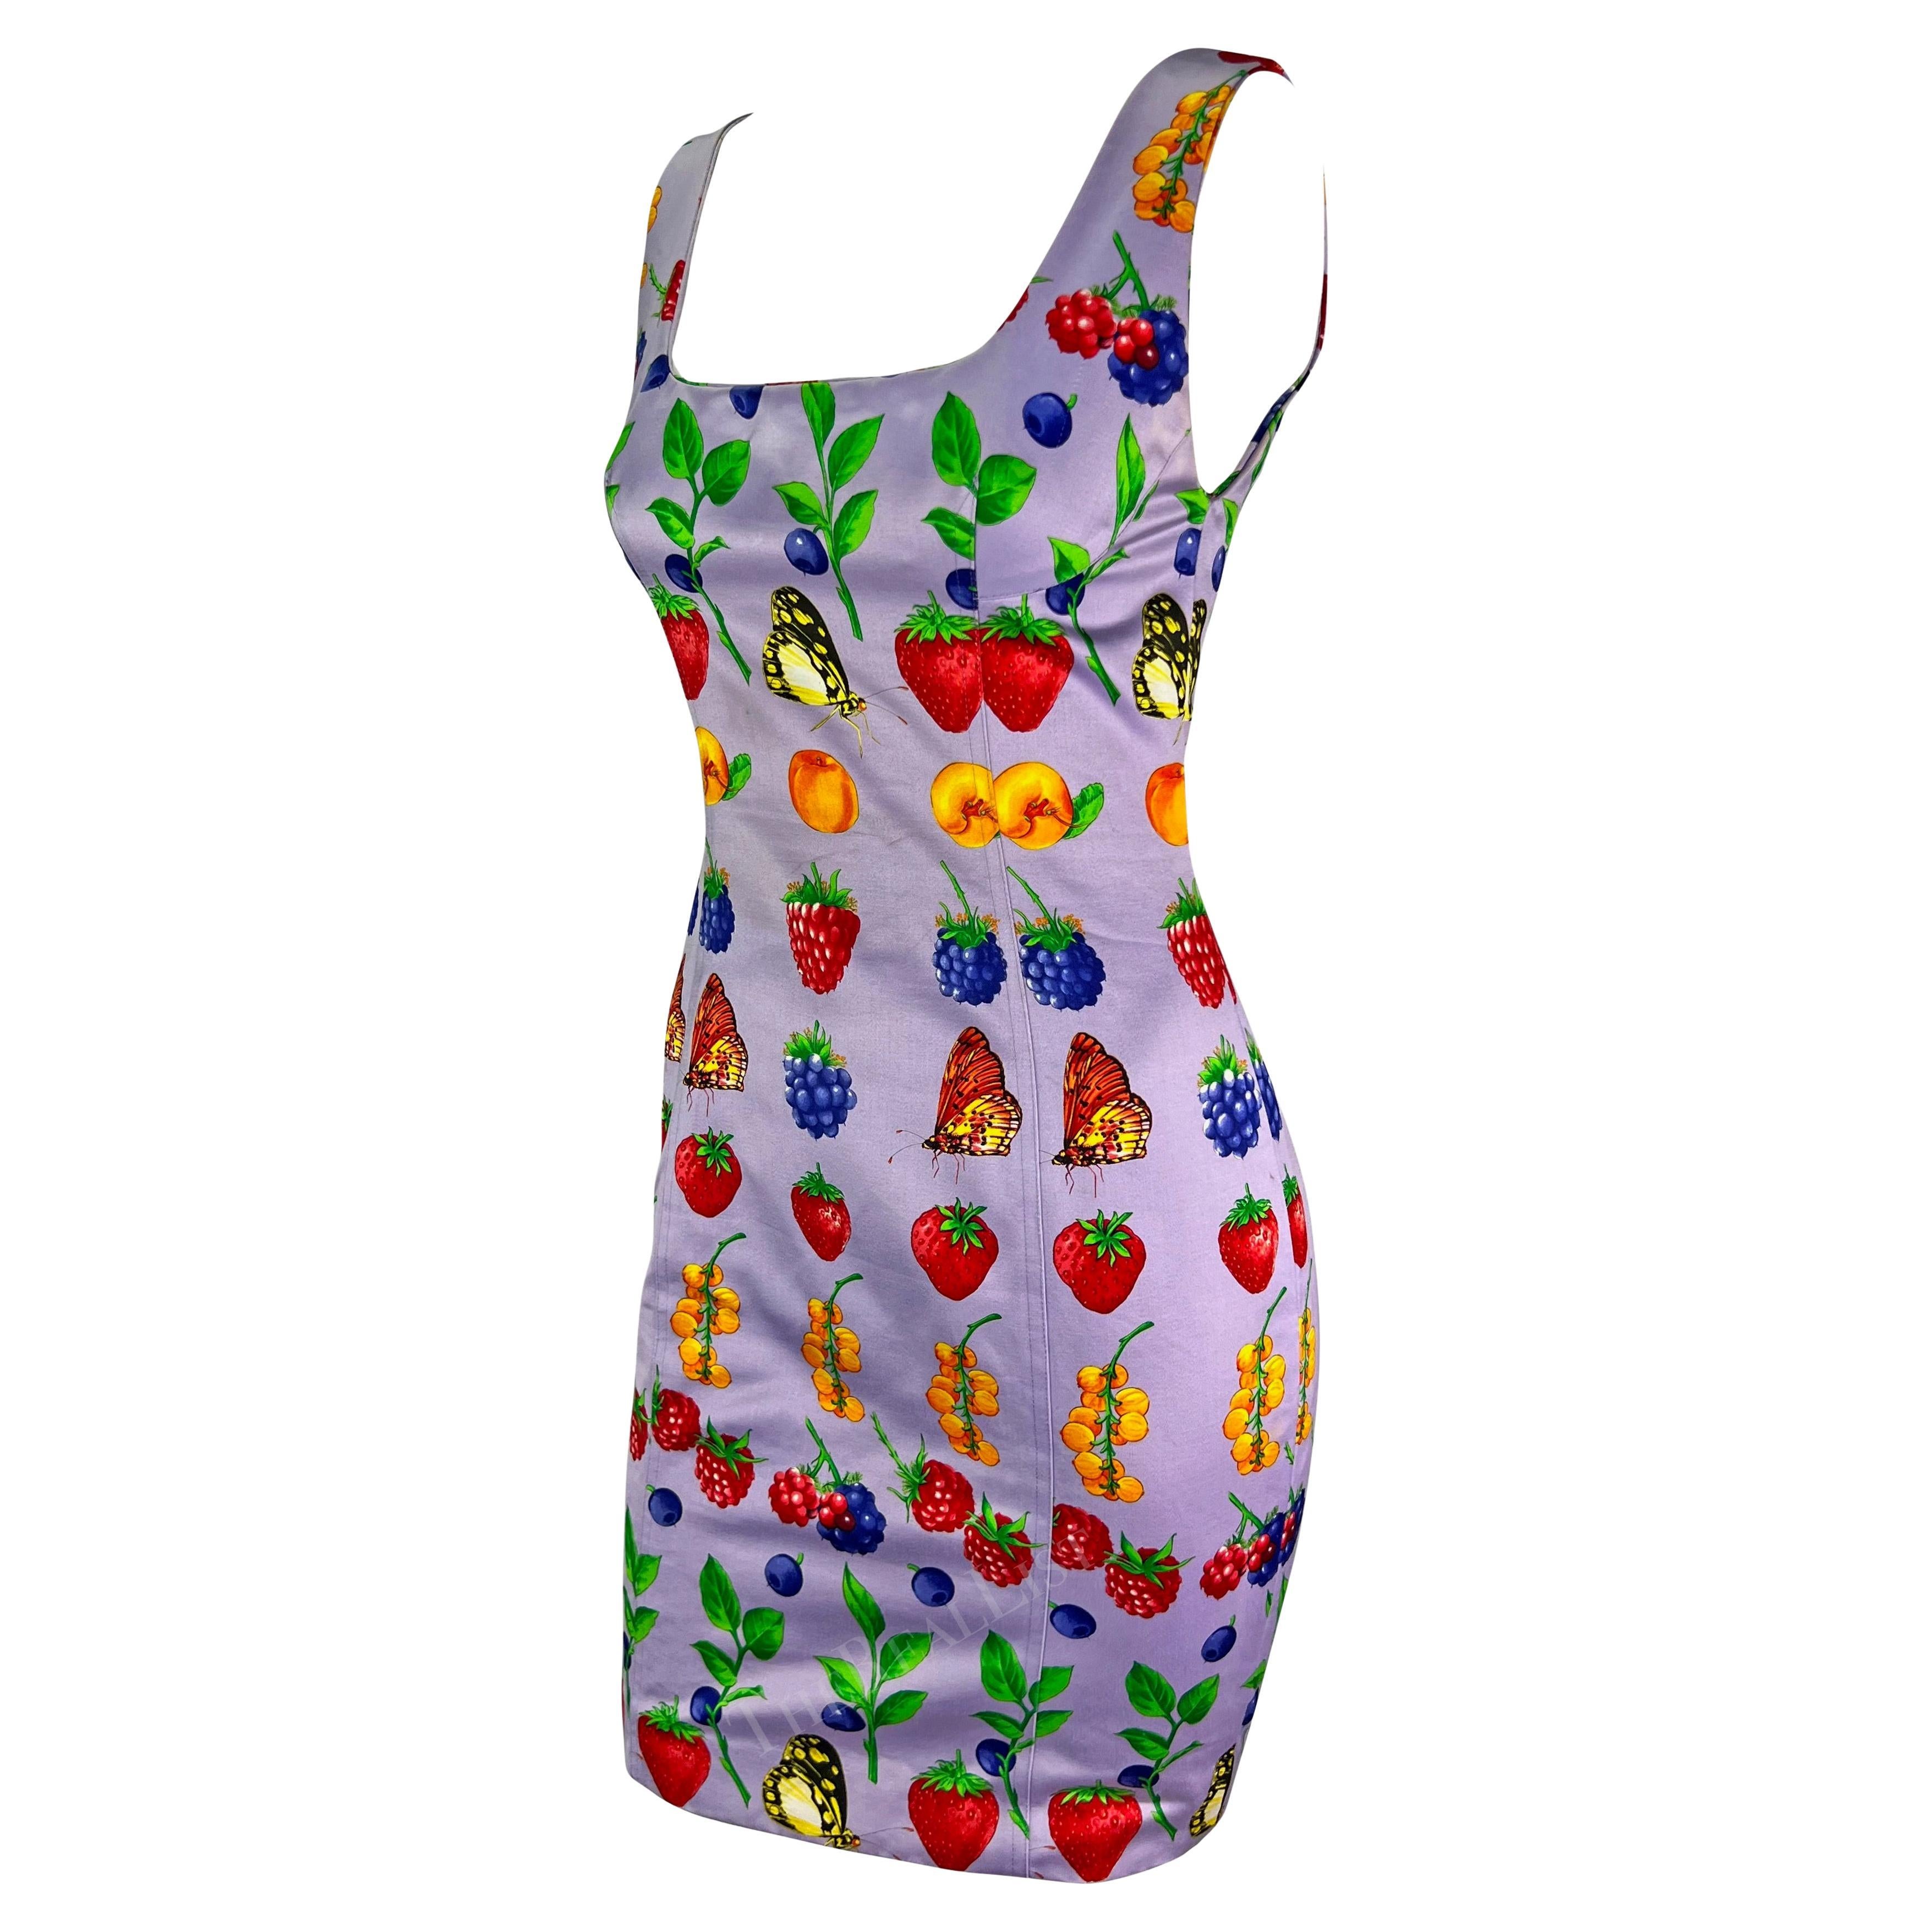 Presenting a fabulous lavender Gianni Versace fruit motif mini dress, designed by Gianni Versace. From the Spring/Summer 1995 collection, this dress is covered in a vibrant fruit and butterfly print. The sleeveless dress features a sheath cut and a